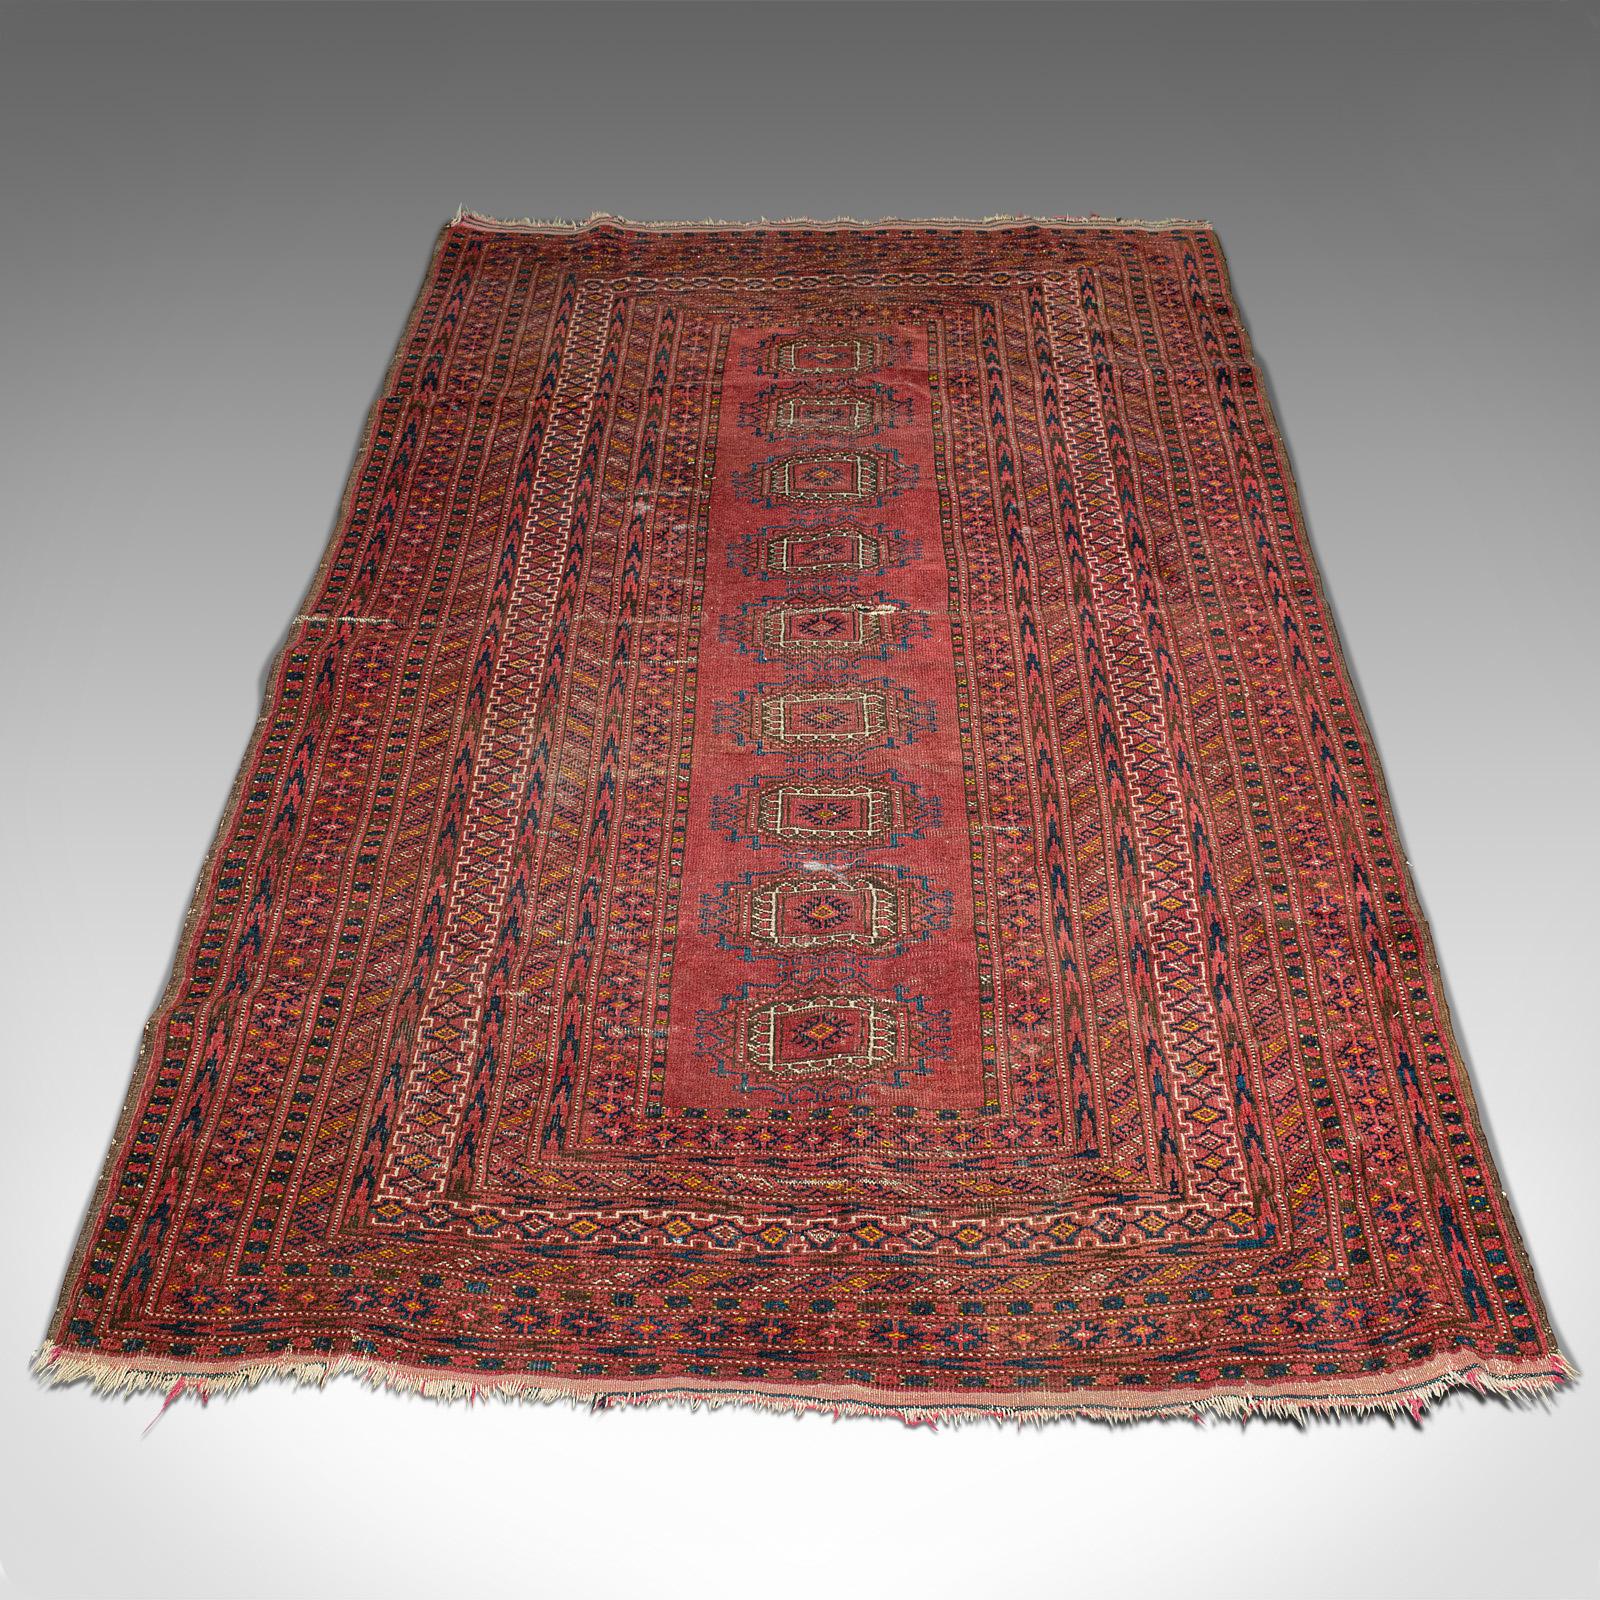 This is an antique Turkoman rug. A Middle Eastern, woven decorative carpet, dating to the early 20th century, circa 1920.

Endearing antique rug with pattern detail enthusiastic detail
Of dozar size at 120.5cm x 215cm (47.5